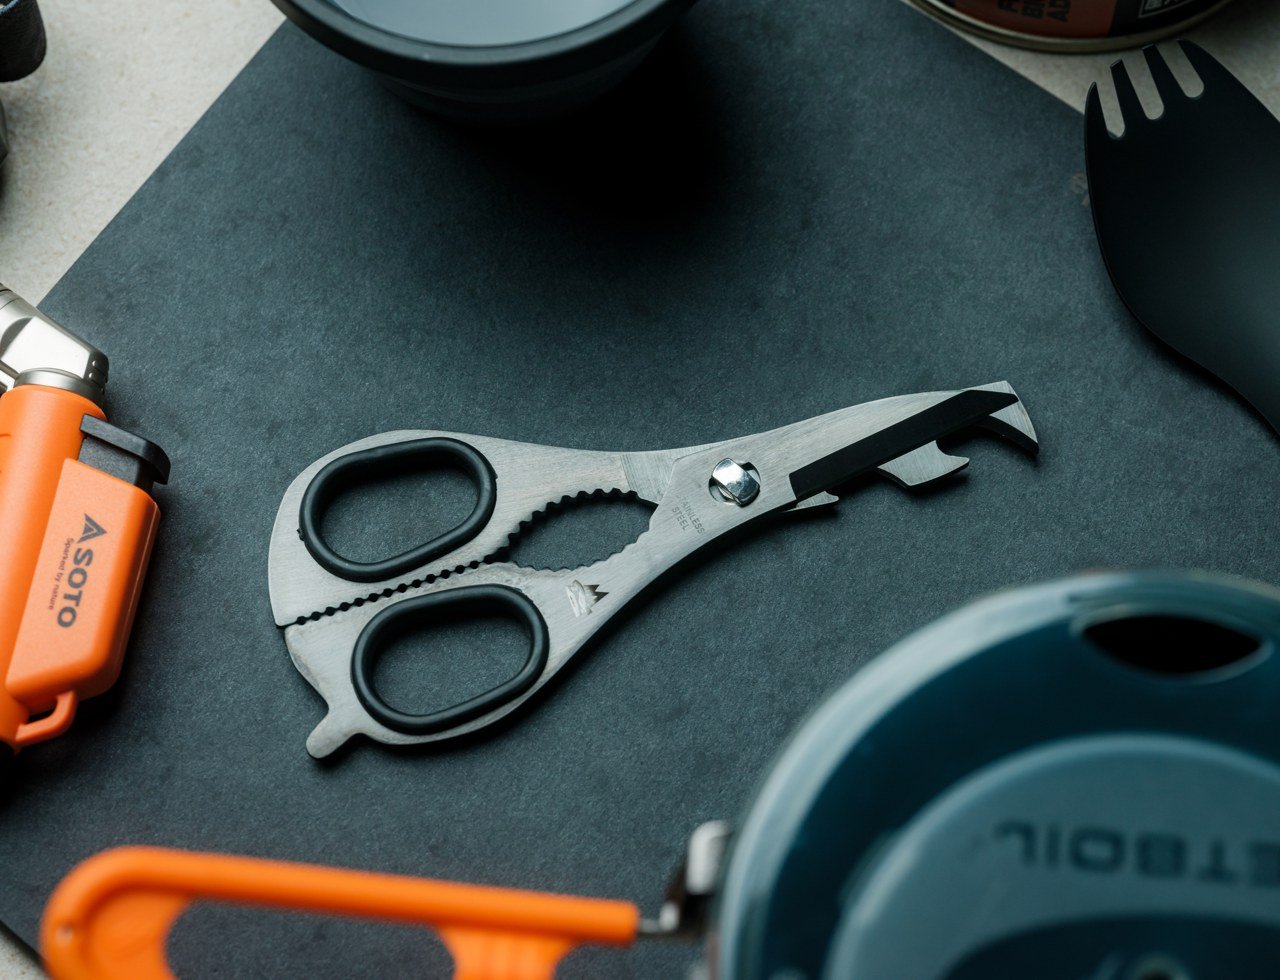 https://www.yankodesign.com/images/design_news/2023/11/these_palm-sized_scissors_combine_8_functions_1.jpg